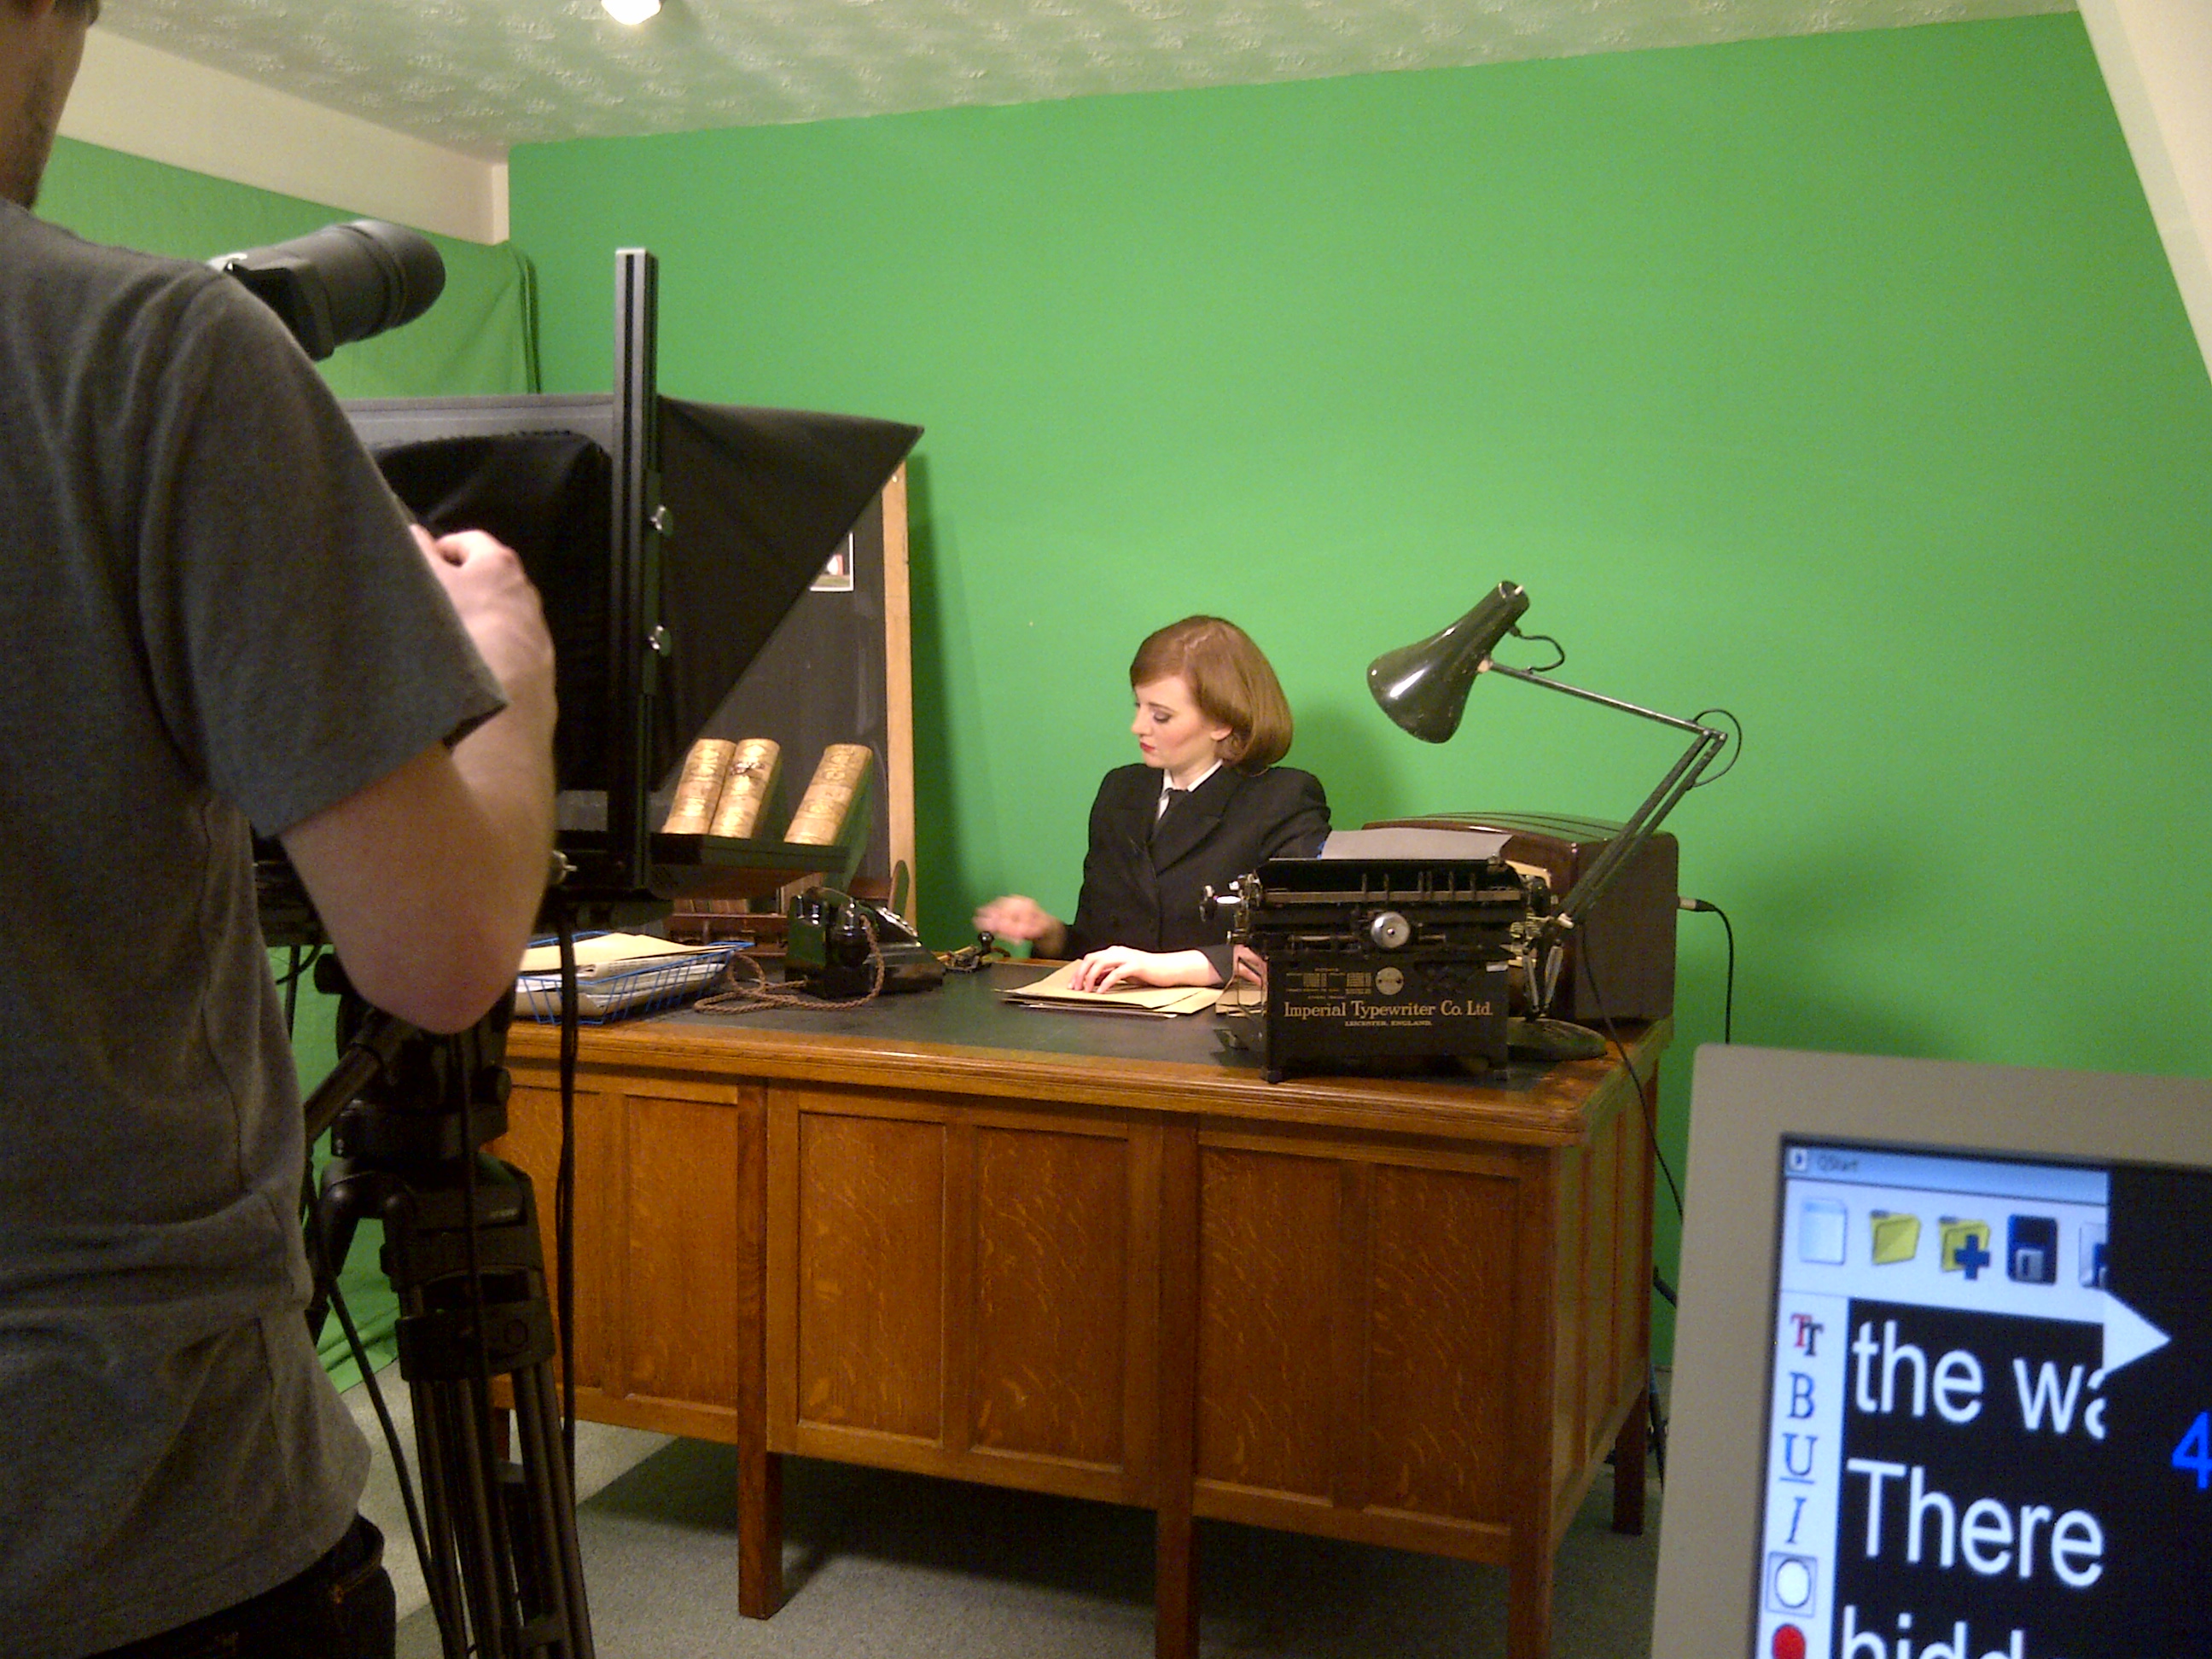 Filming Tour Video at Bletchley Park